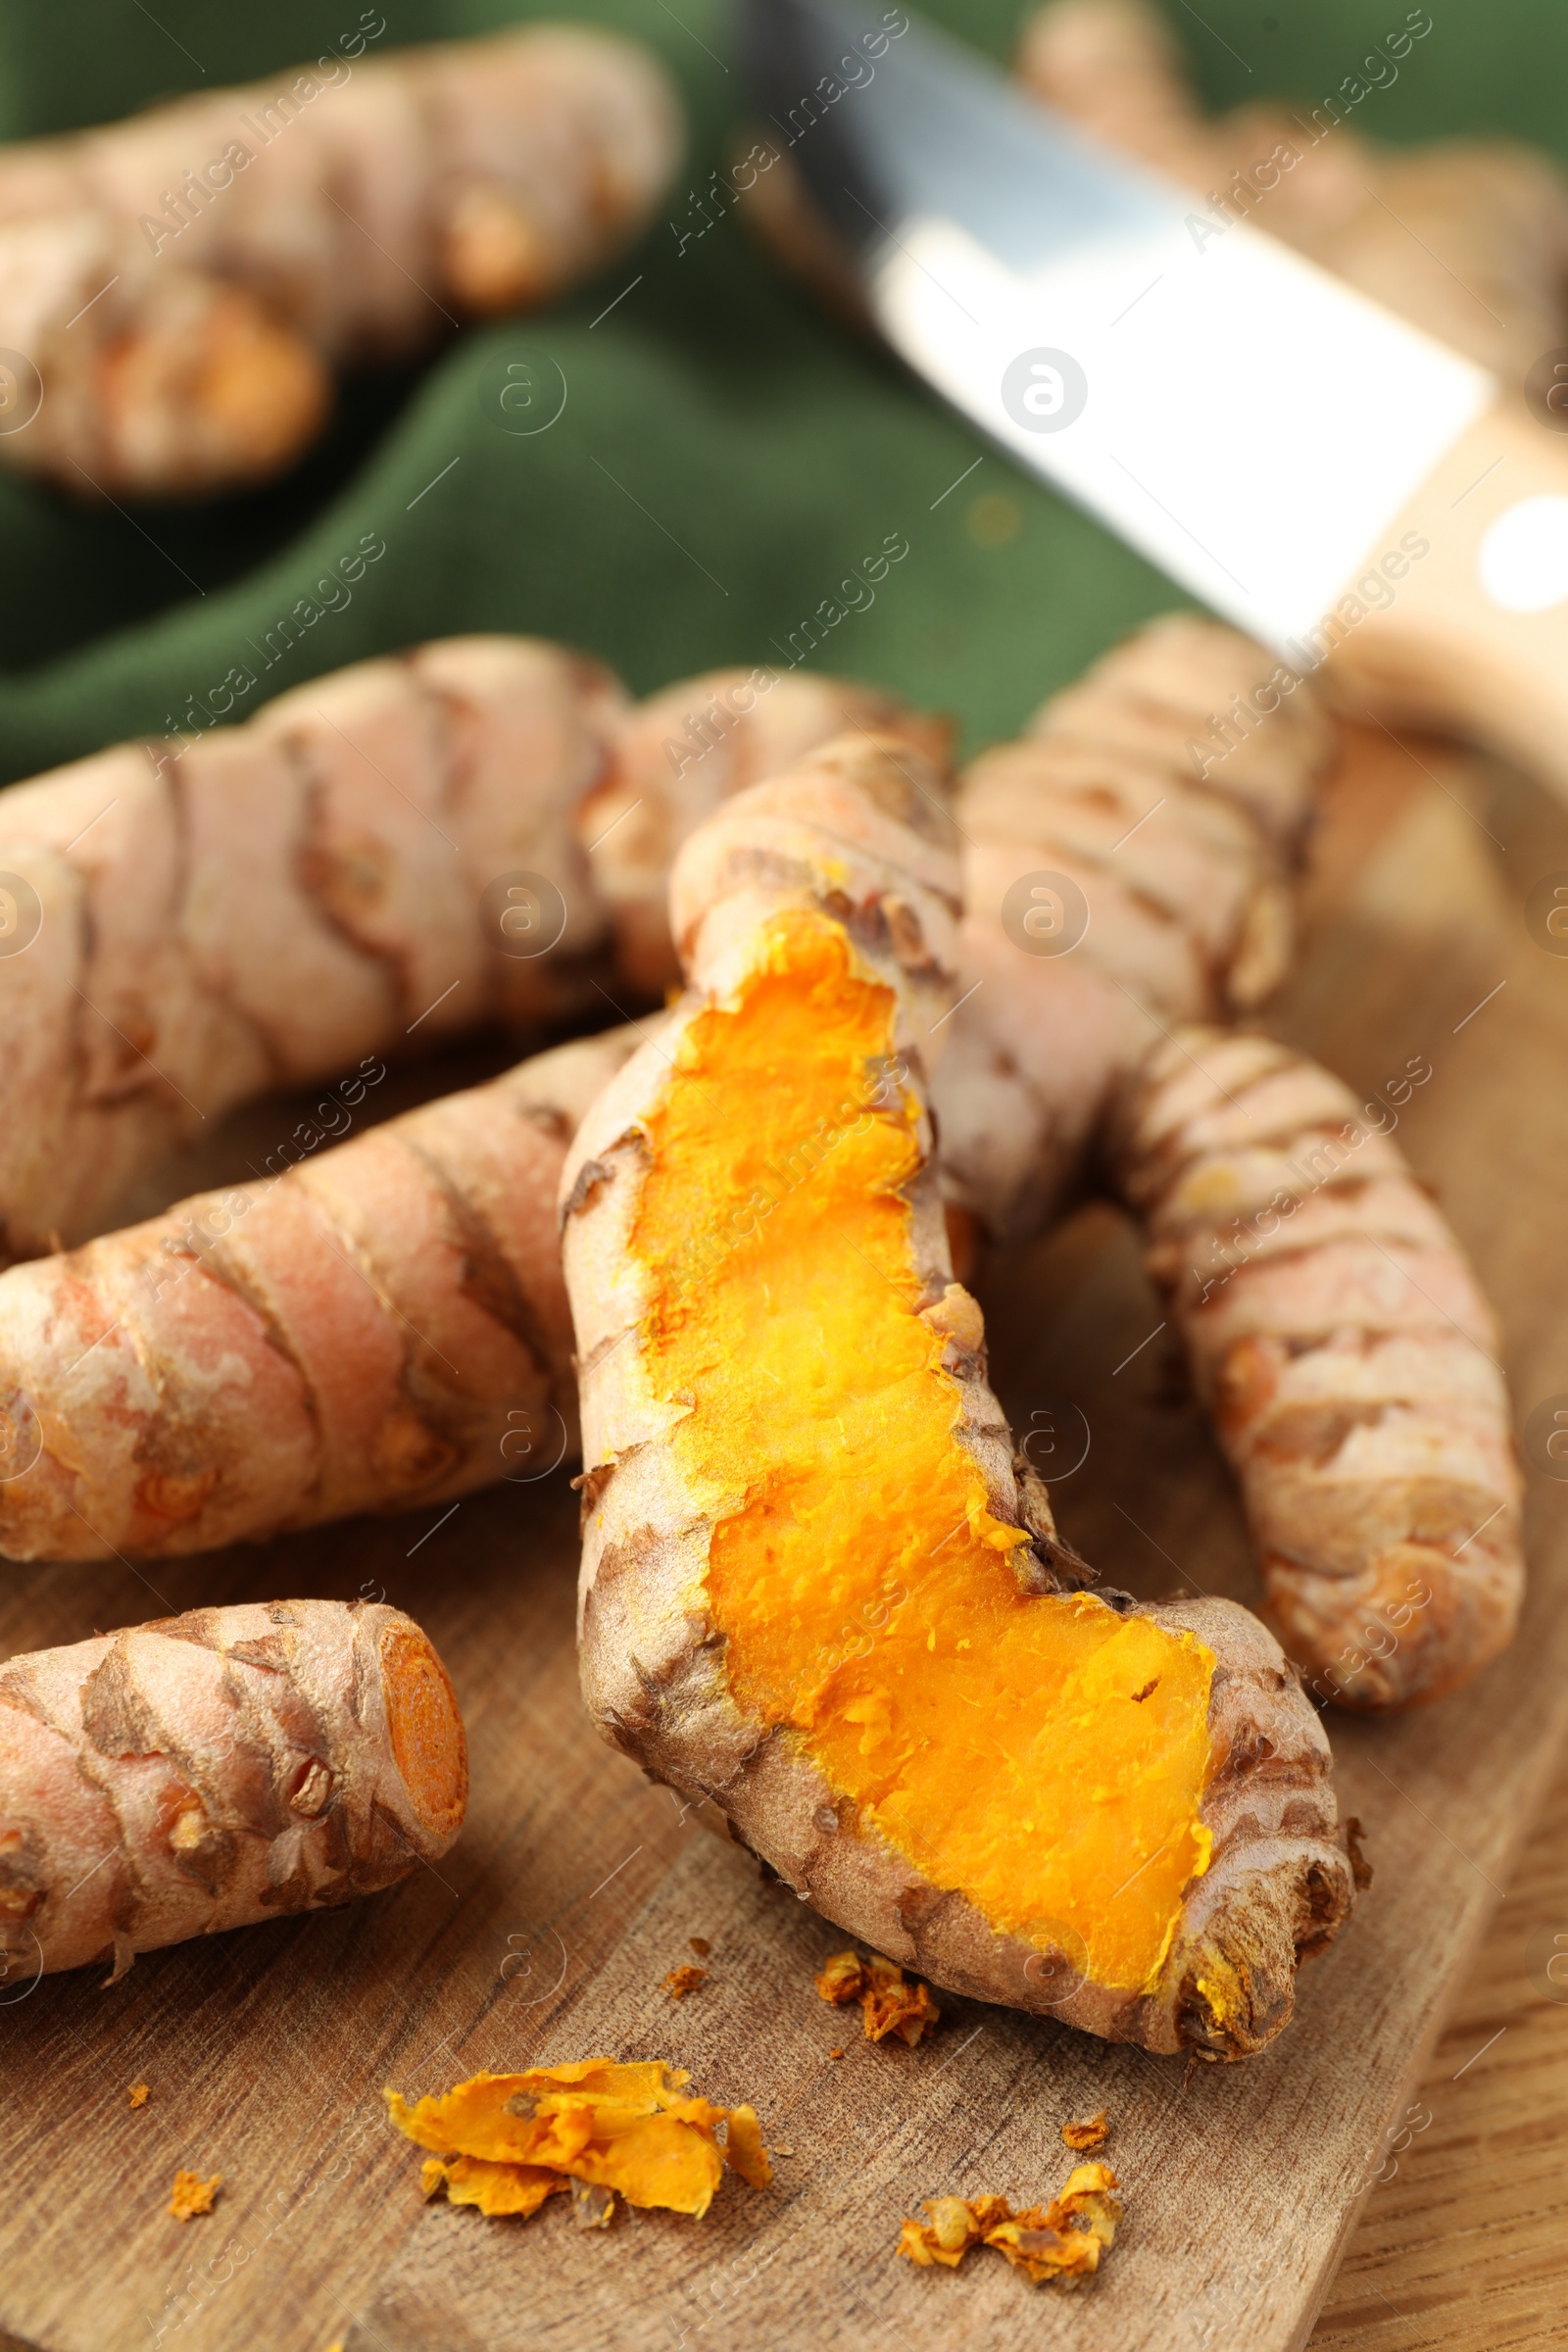 Photo of Many raw turmeric roots on table, closeup